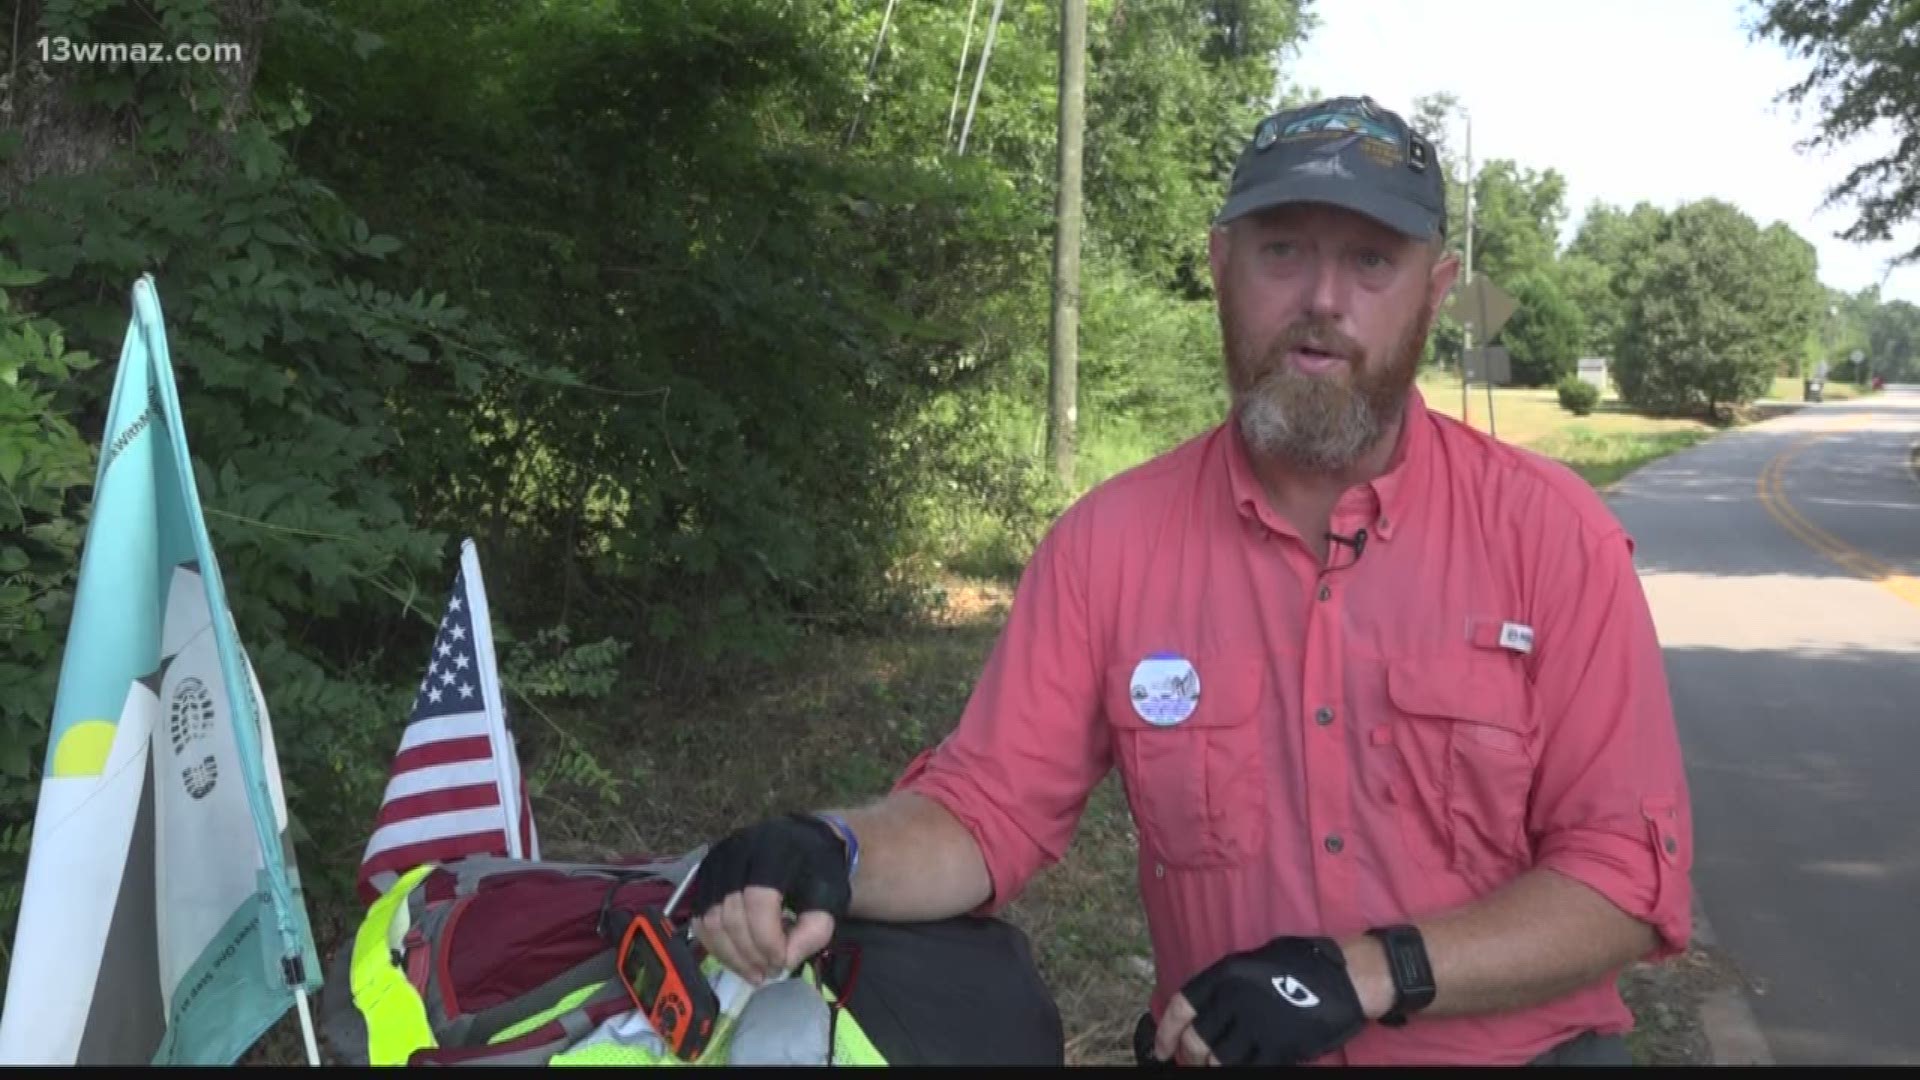 For the last four months, Jimmy Novak has walked his way from the state of Washington through the country, and this week, he's in Central Georgia. Kayla Solomon caught up with him along Highway 41 to find out why this walk is so important to him.